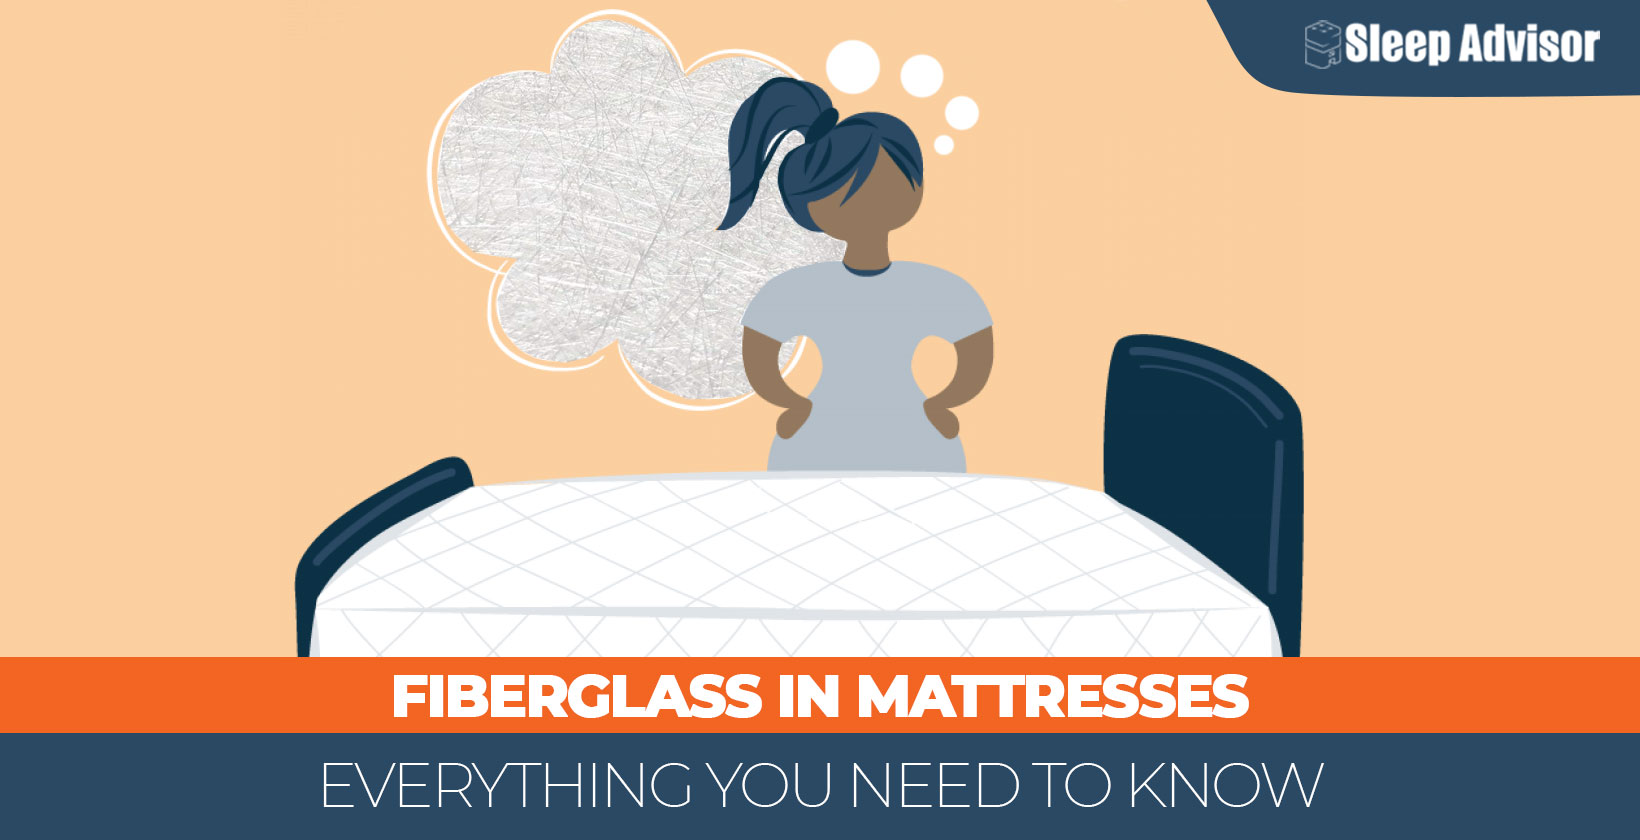 Everything You Need to Know About Fiberglass in Mattresses